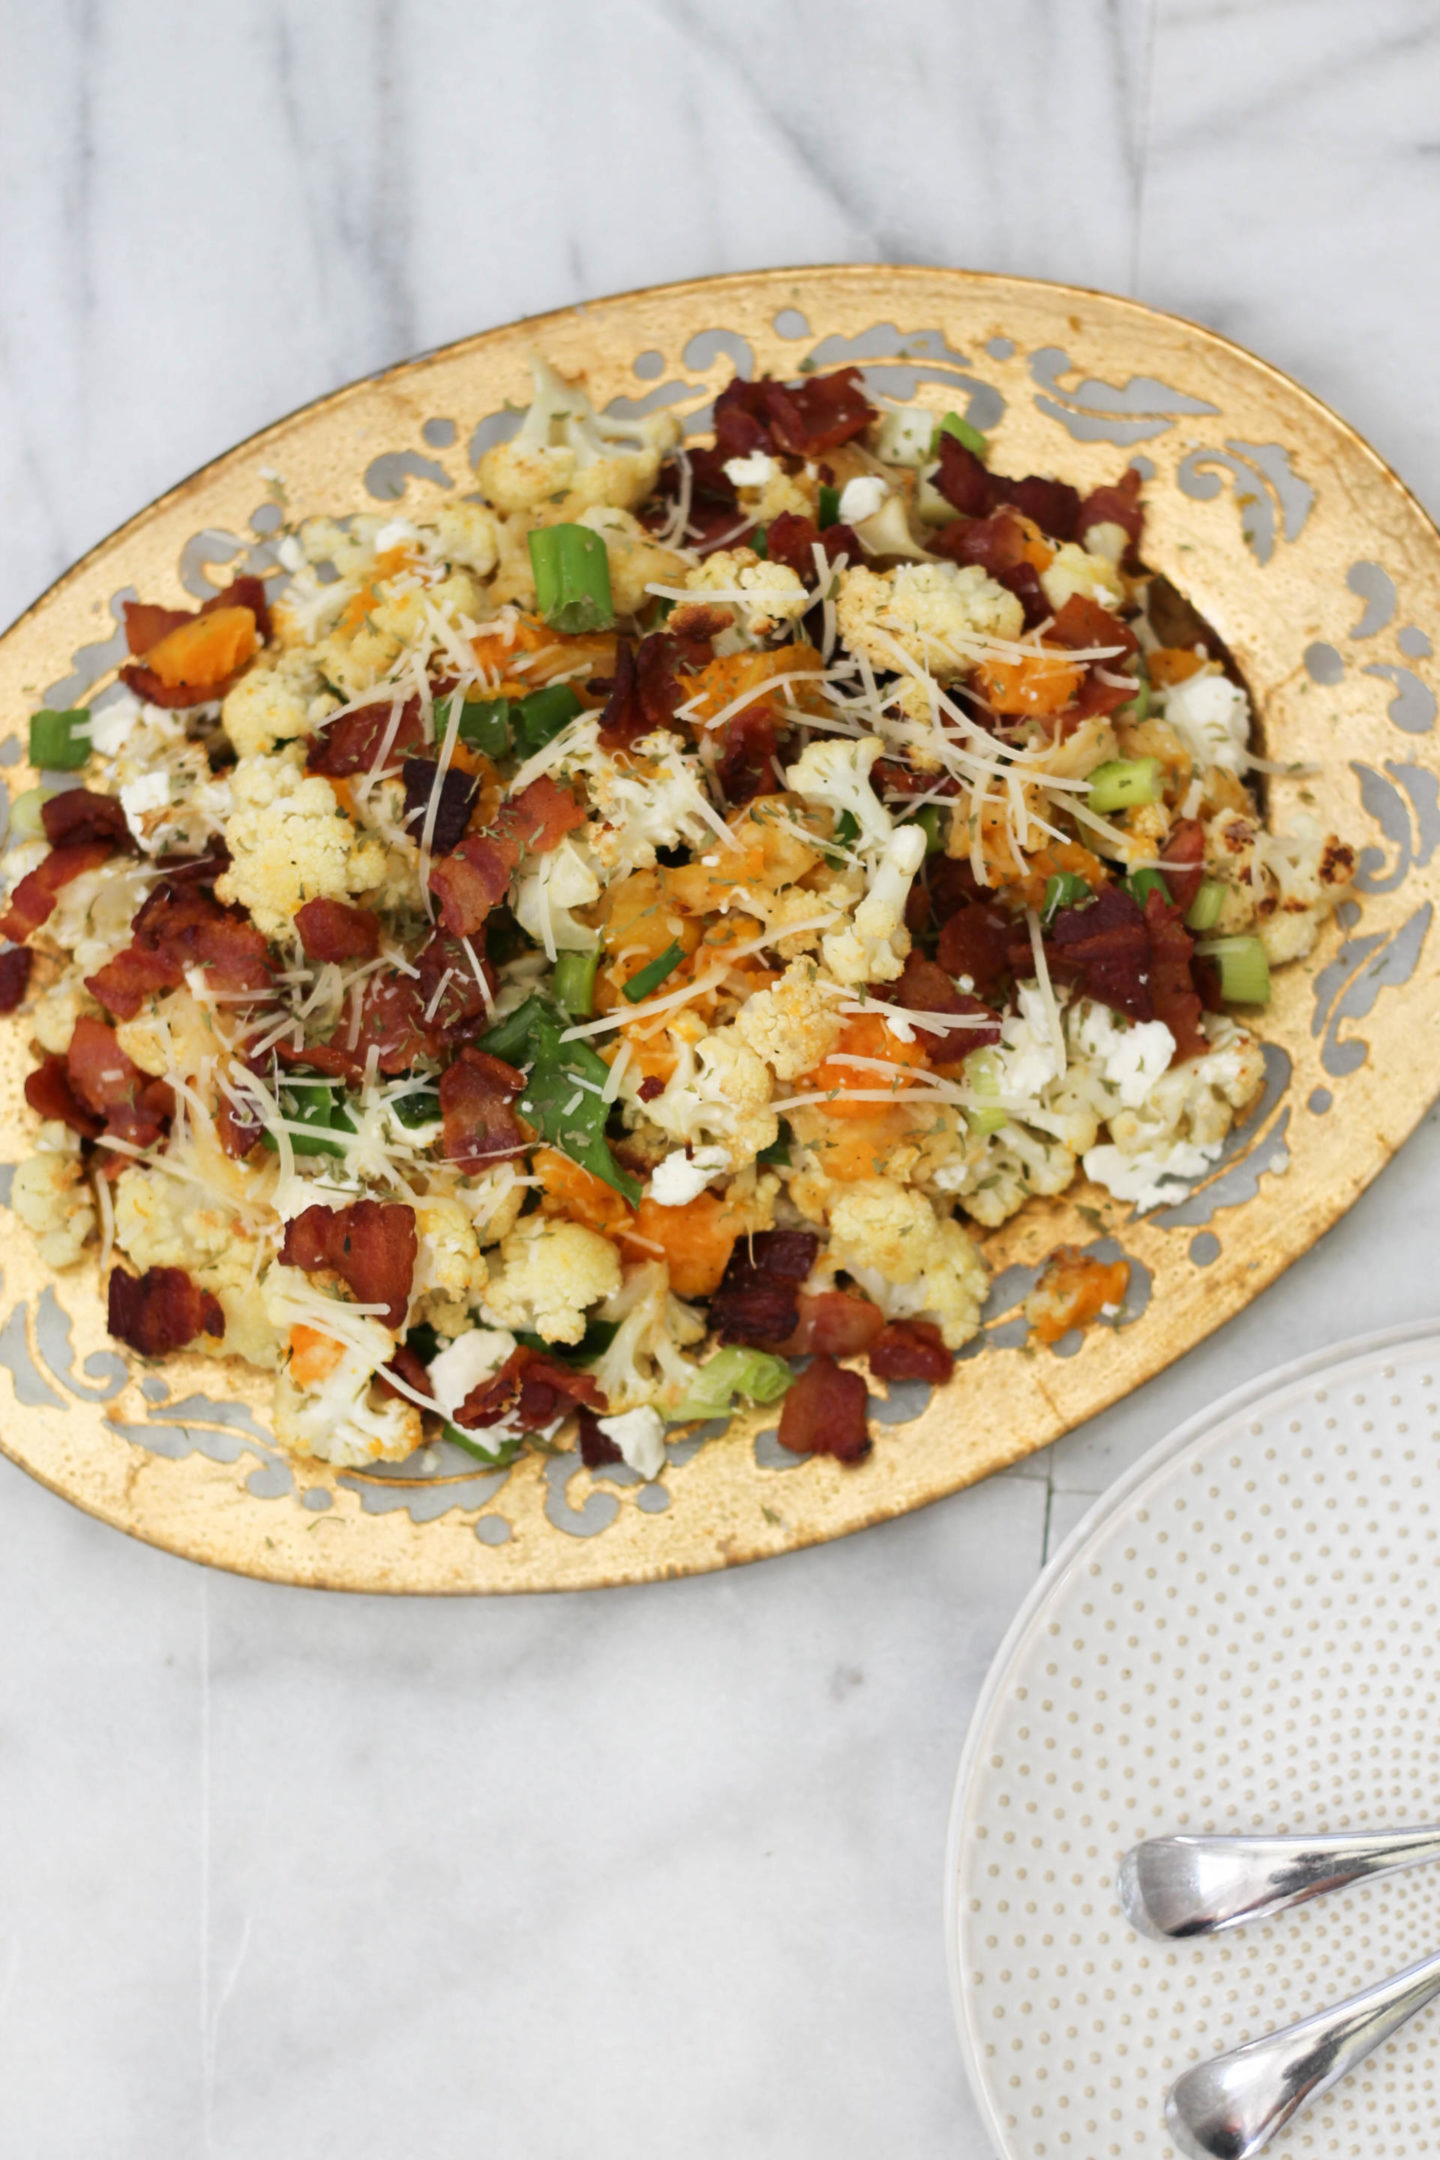 Holiday Ready Roasted Squash Salad by New York blogger Style Waltz